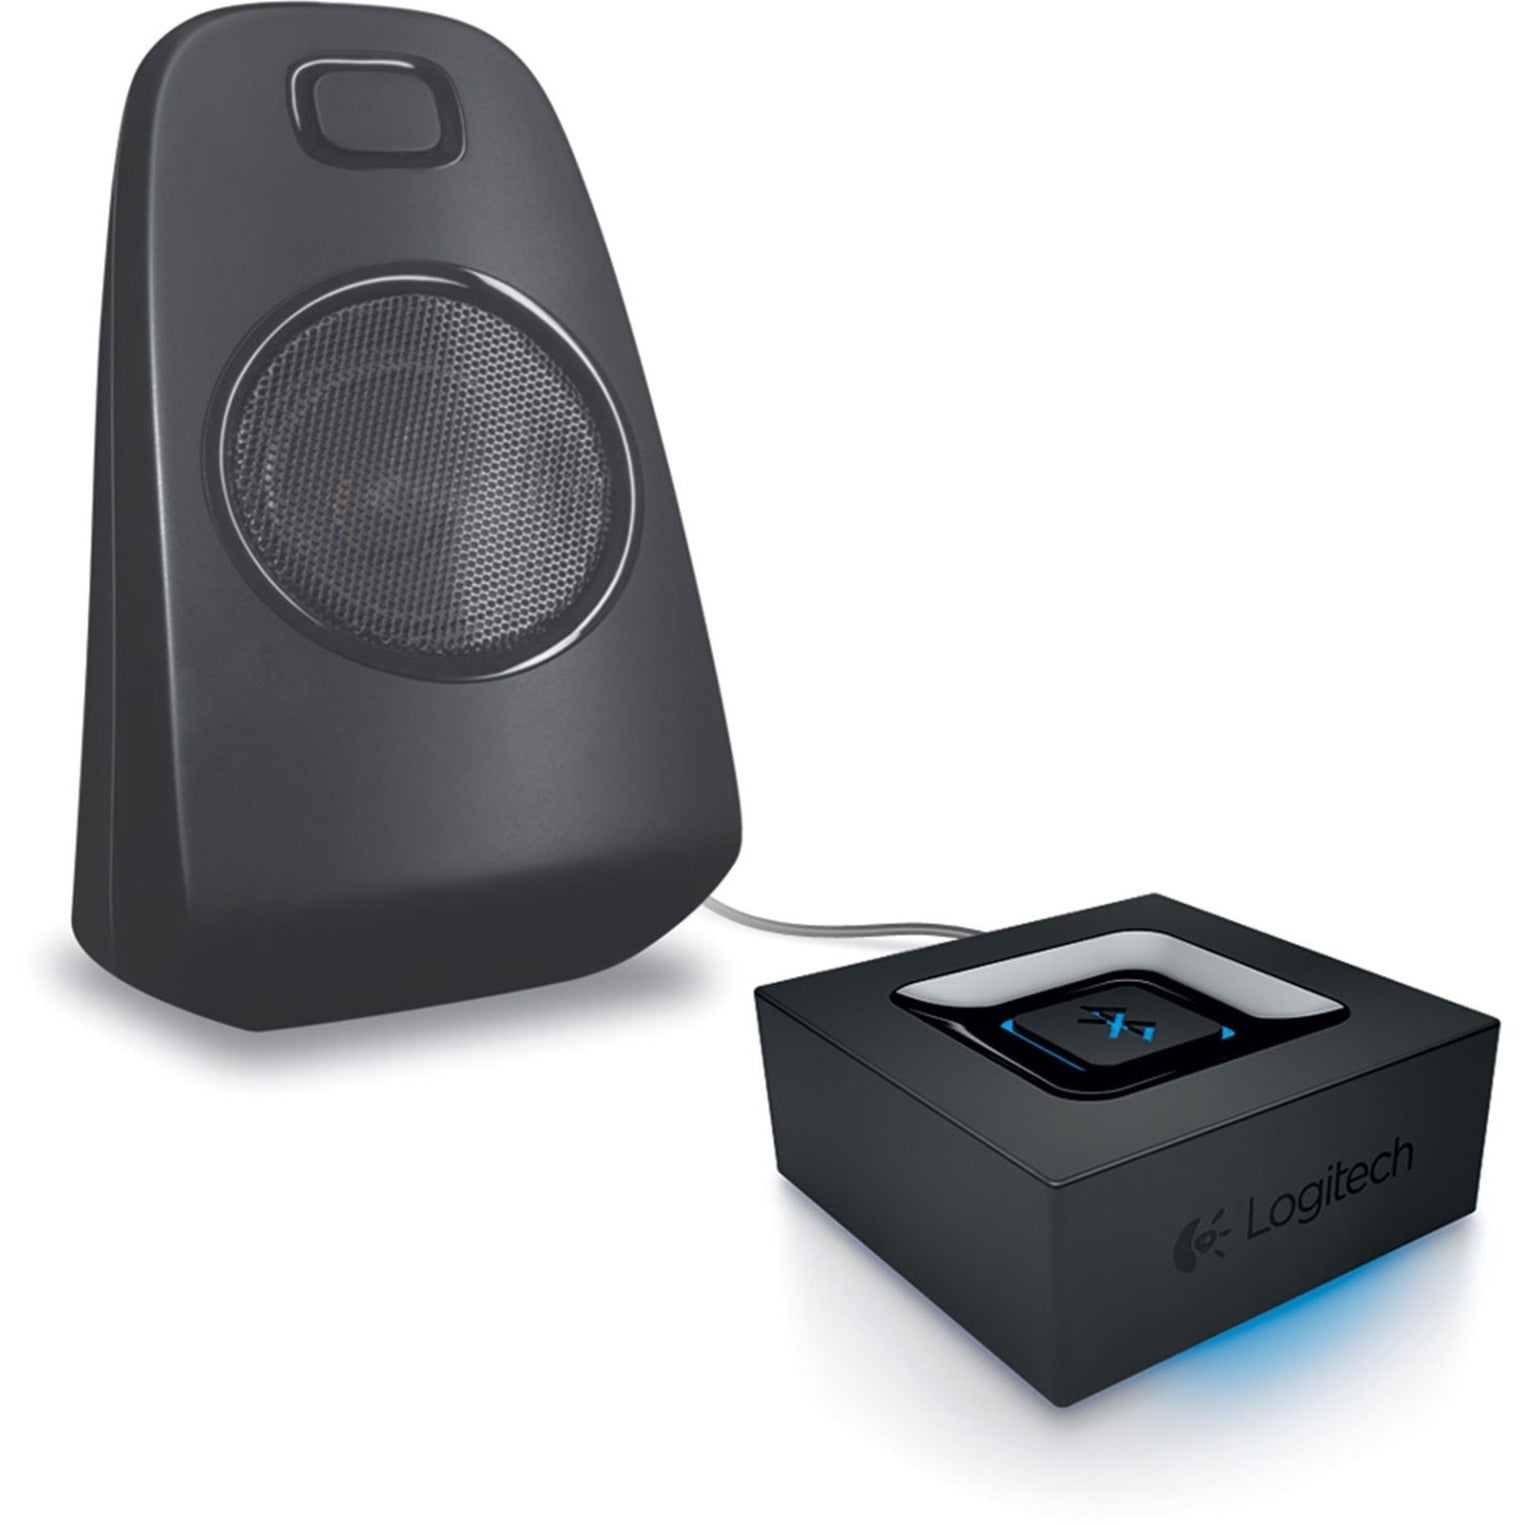 Logitech 980-000910 Bluetooth Audio Adapter, Black - Stream Music Wirelessly to Your Speakers